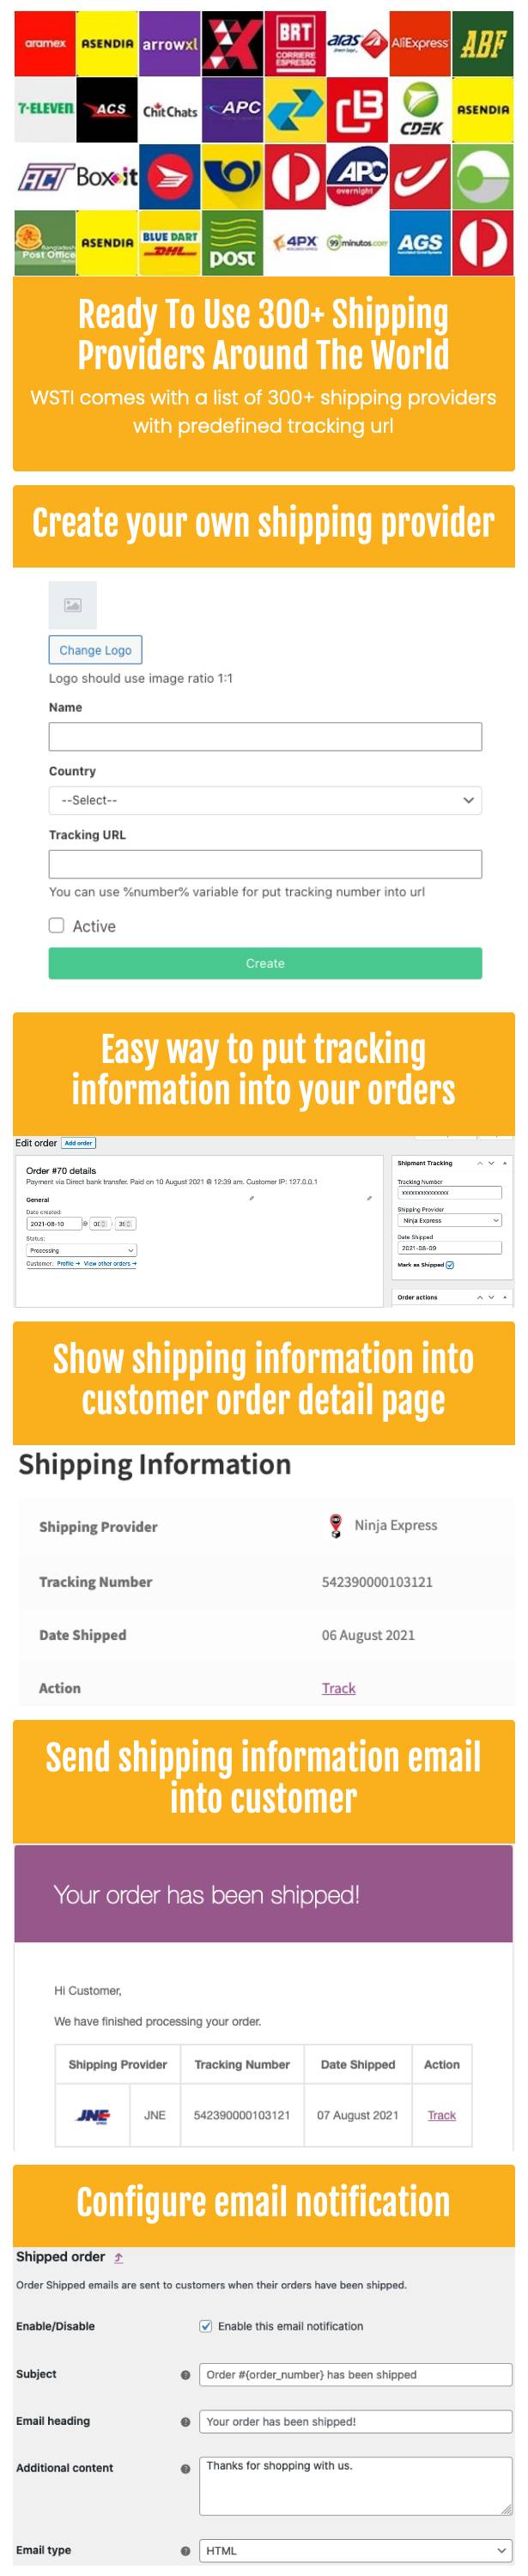 WooCommerce Shipping Tracking Information